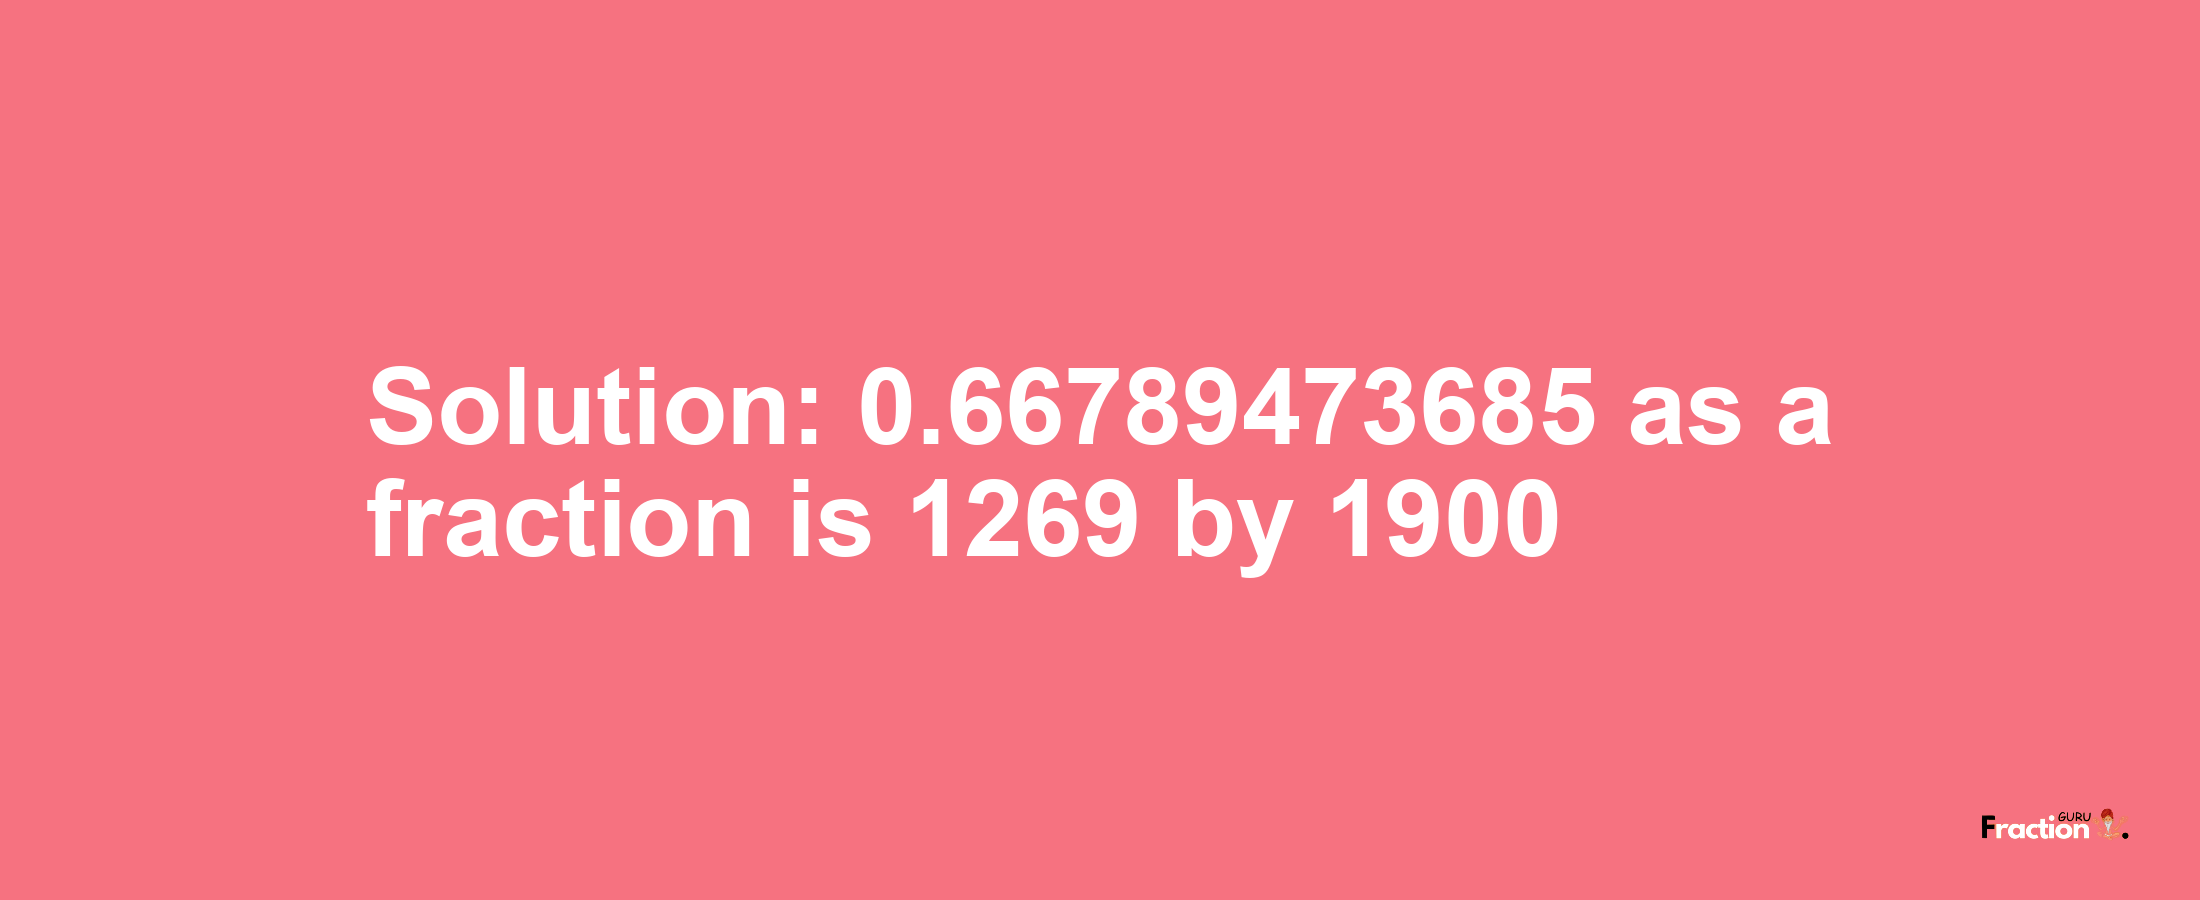 Solution:0.66789473685 as a fraction is 1269/1900